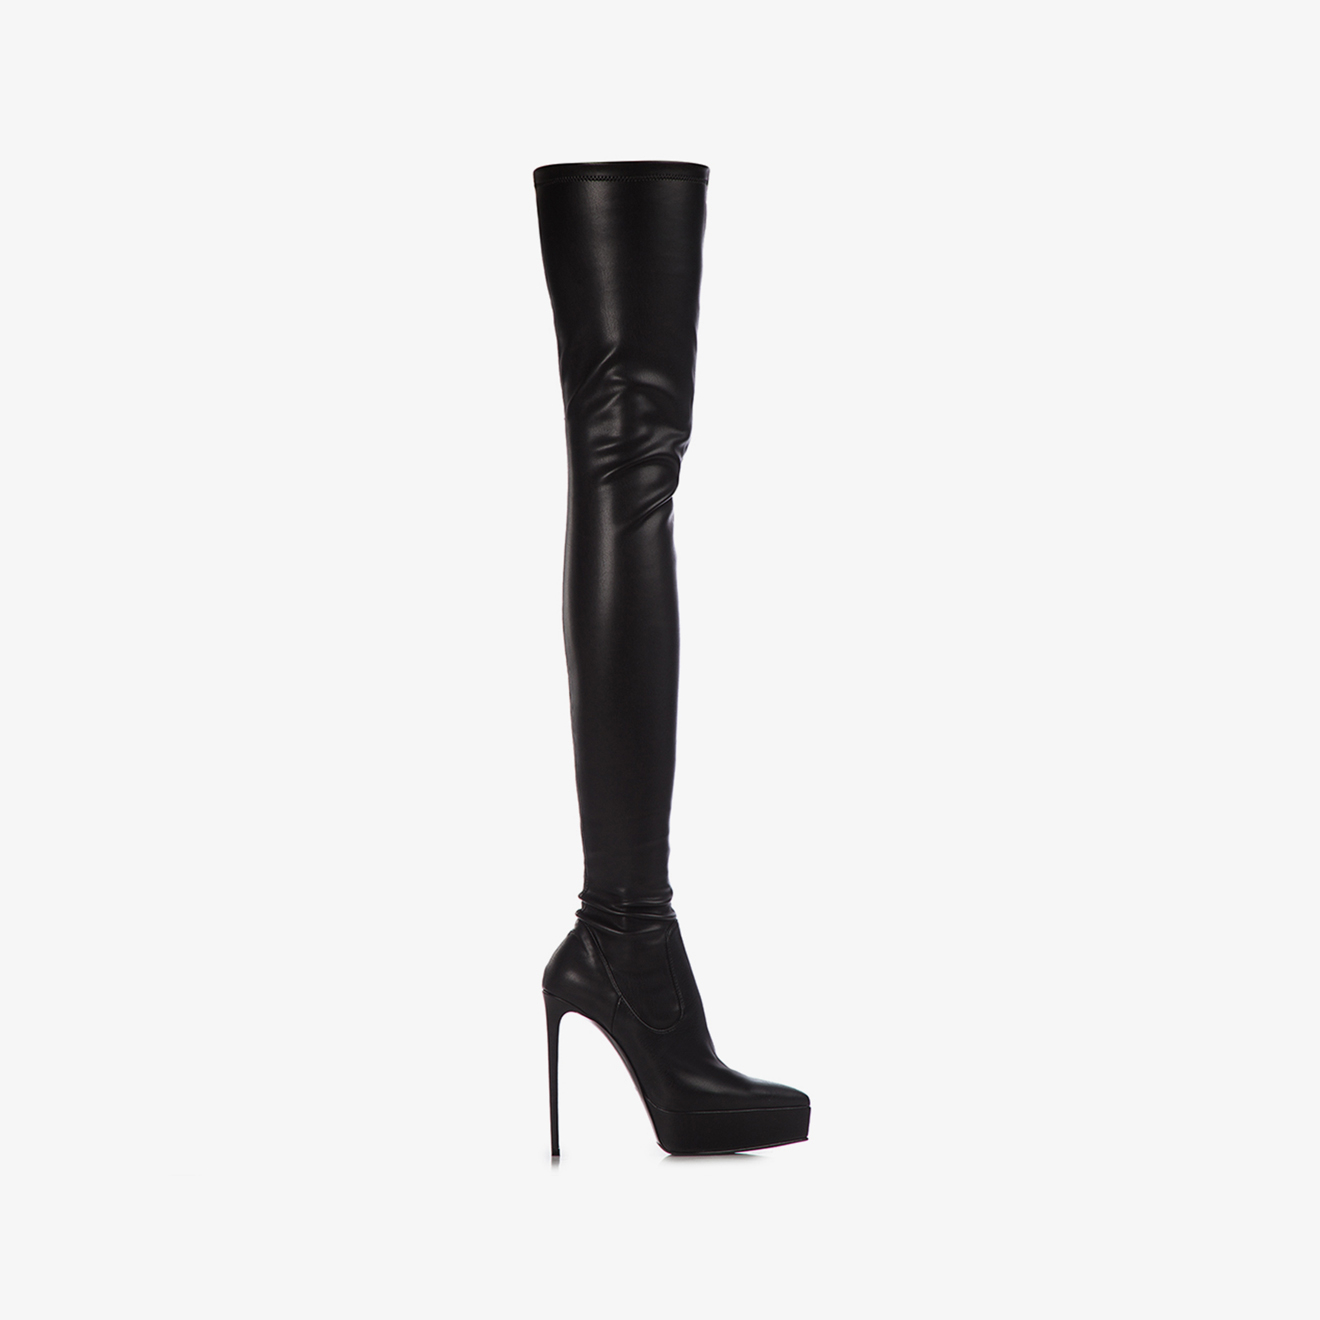 UMA THIGH-HIGH BOOT 140 mm - Le Silla | Official Online Store